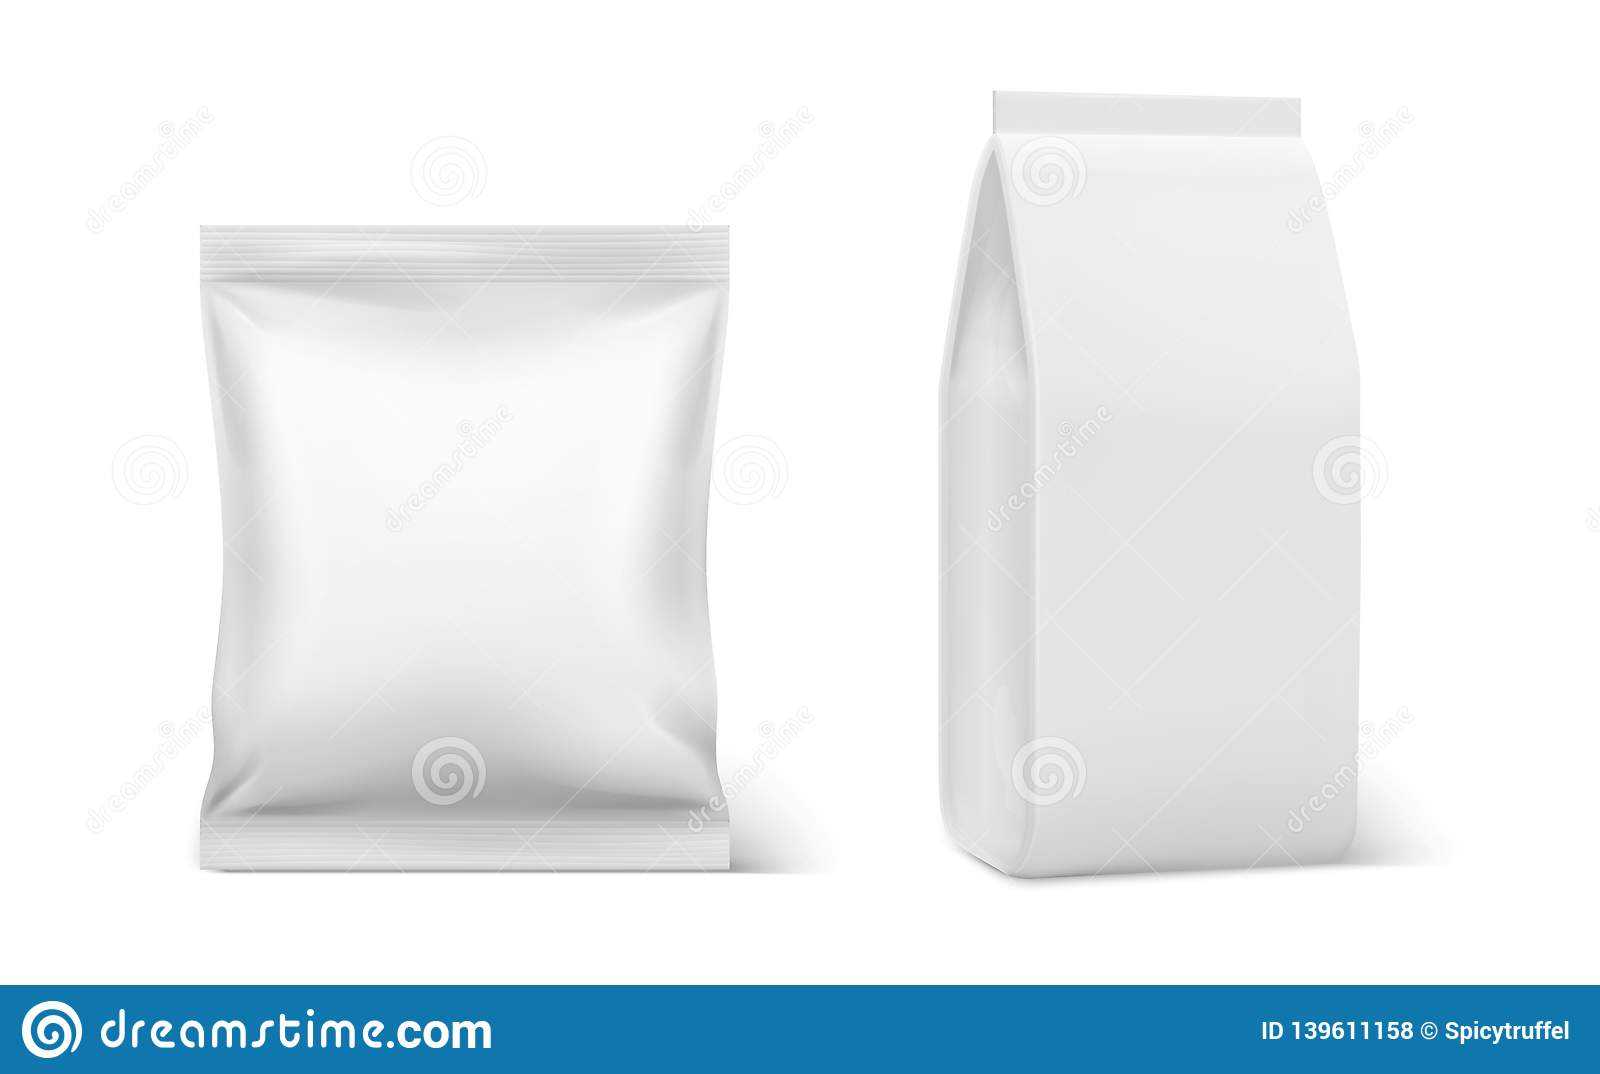 Realistic Pillow Pack. Coffee Doy Blank Mockup, Plastic Throughout Blank Packaging Templates